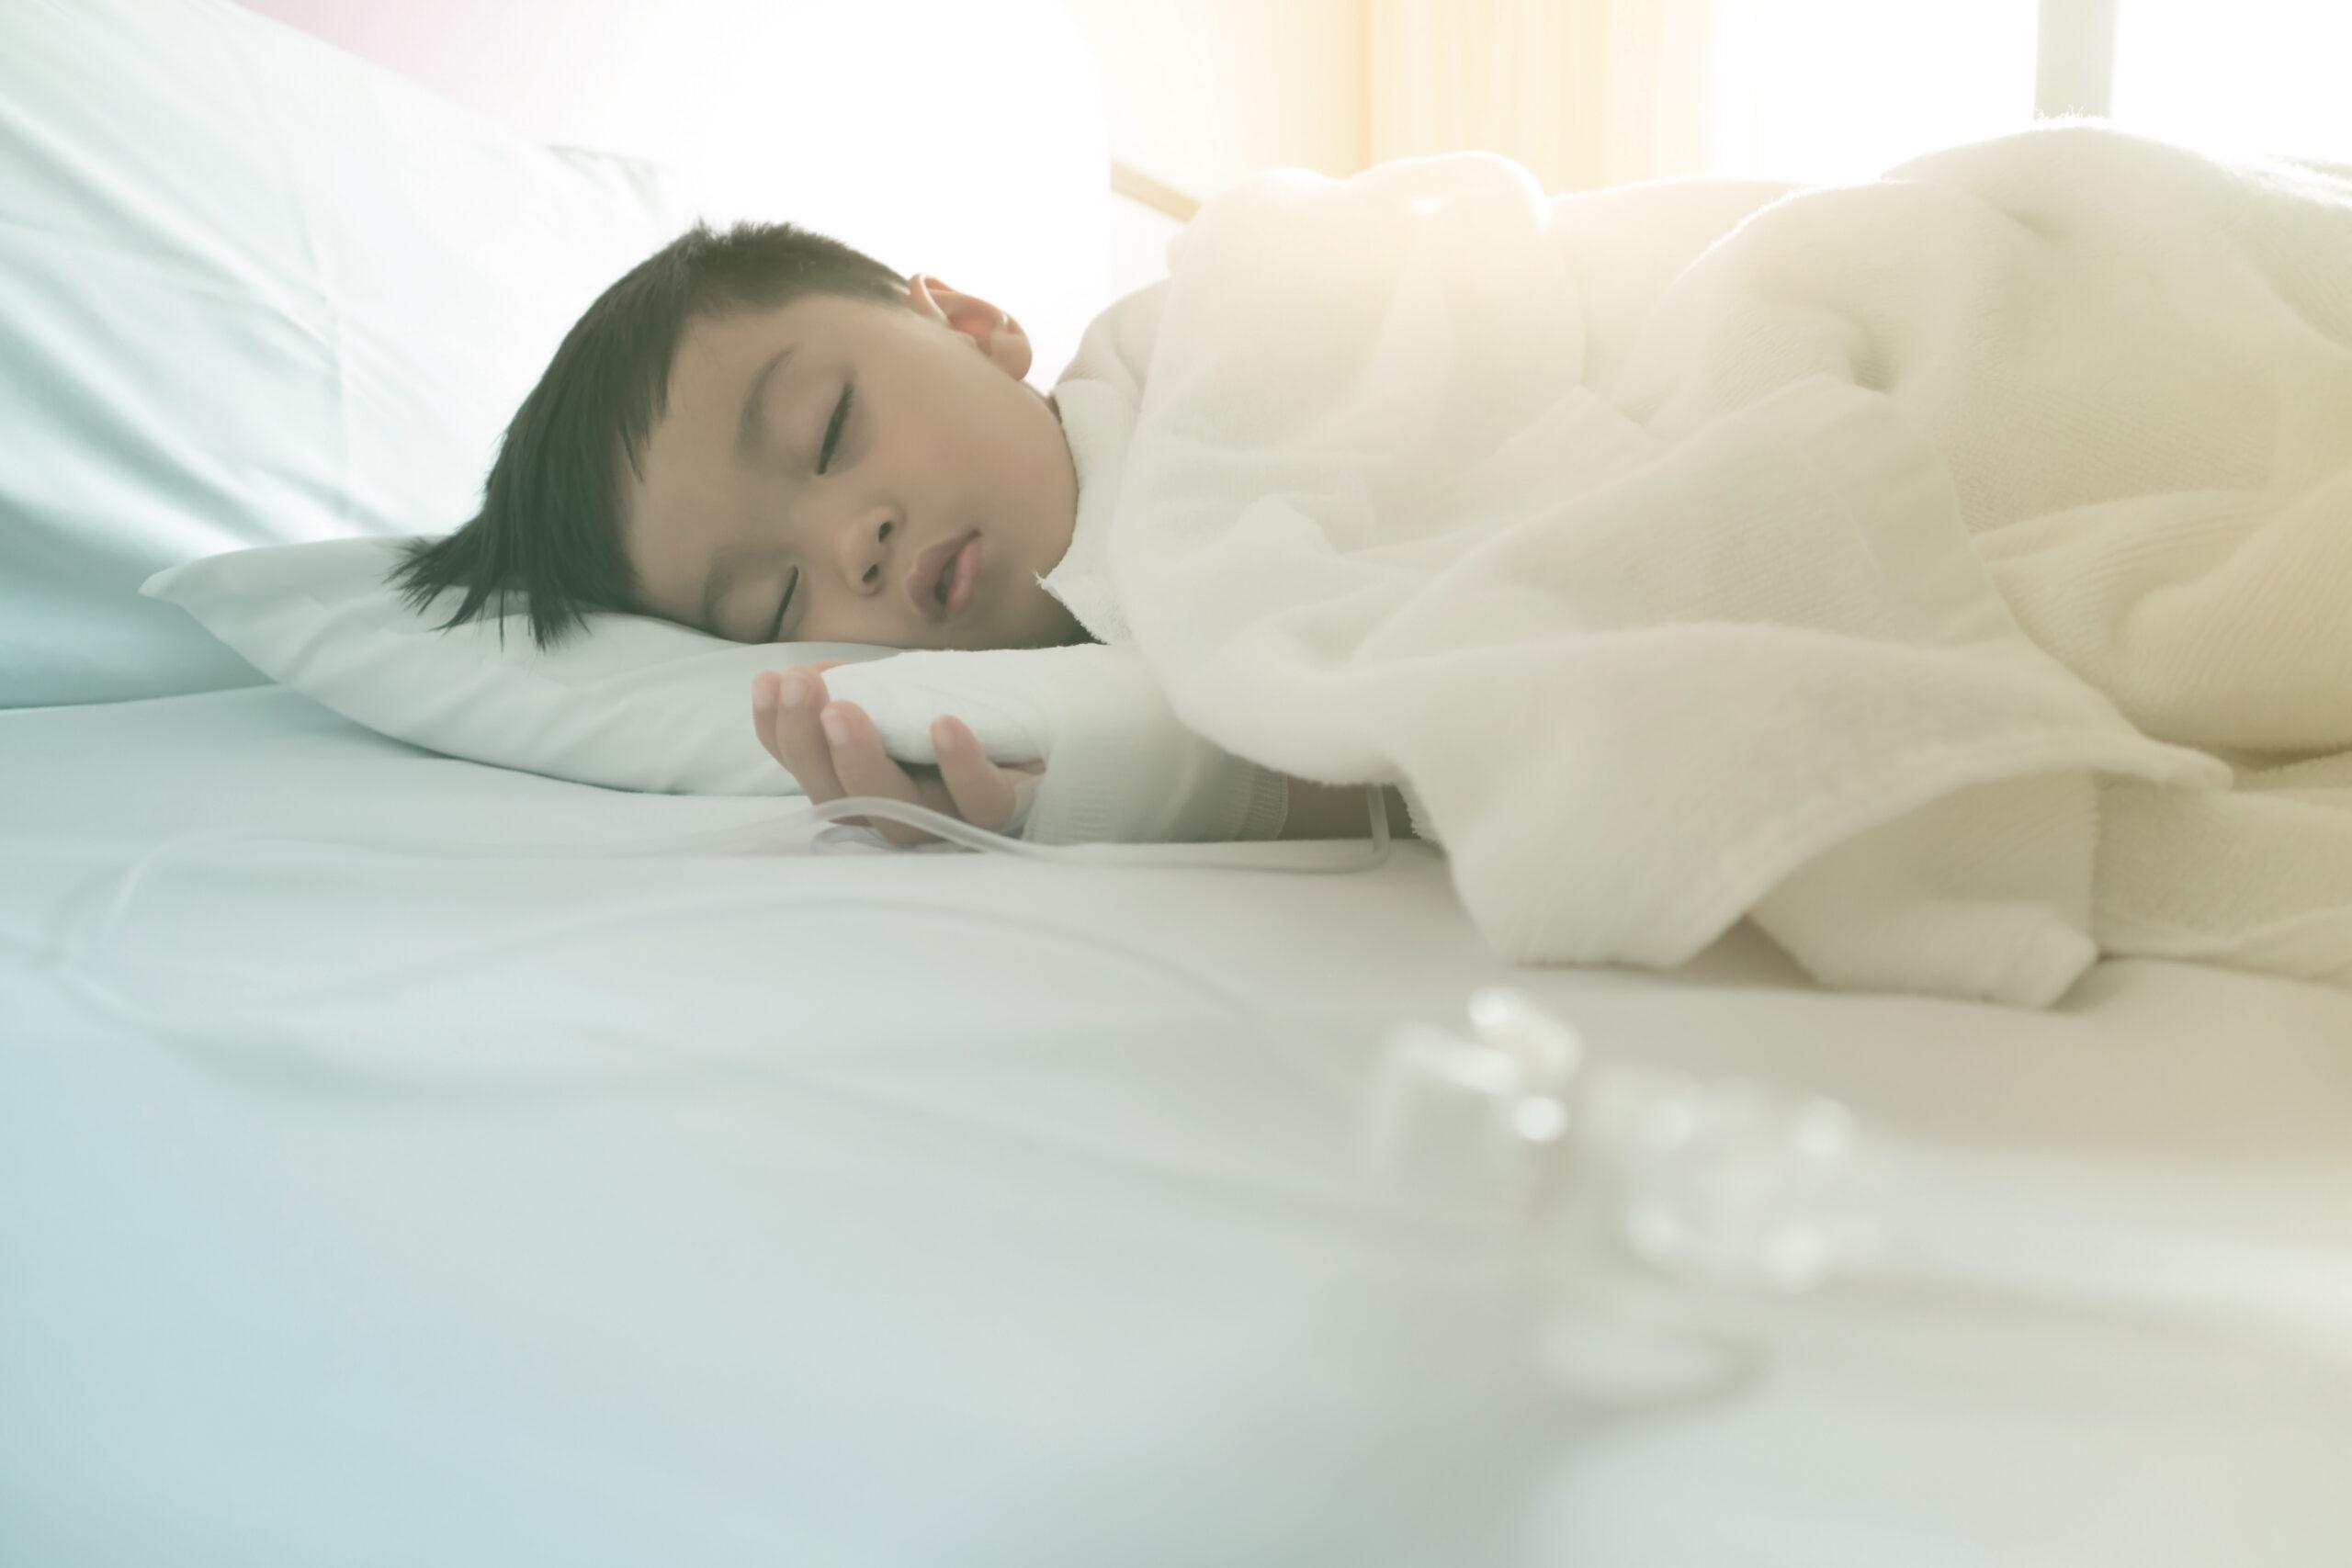 Learn more about pediatric sleep